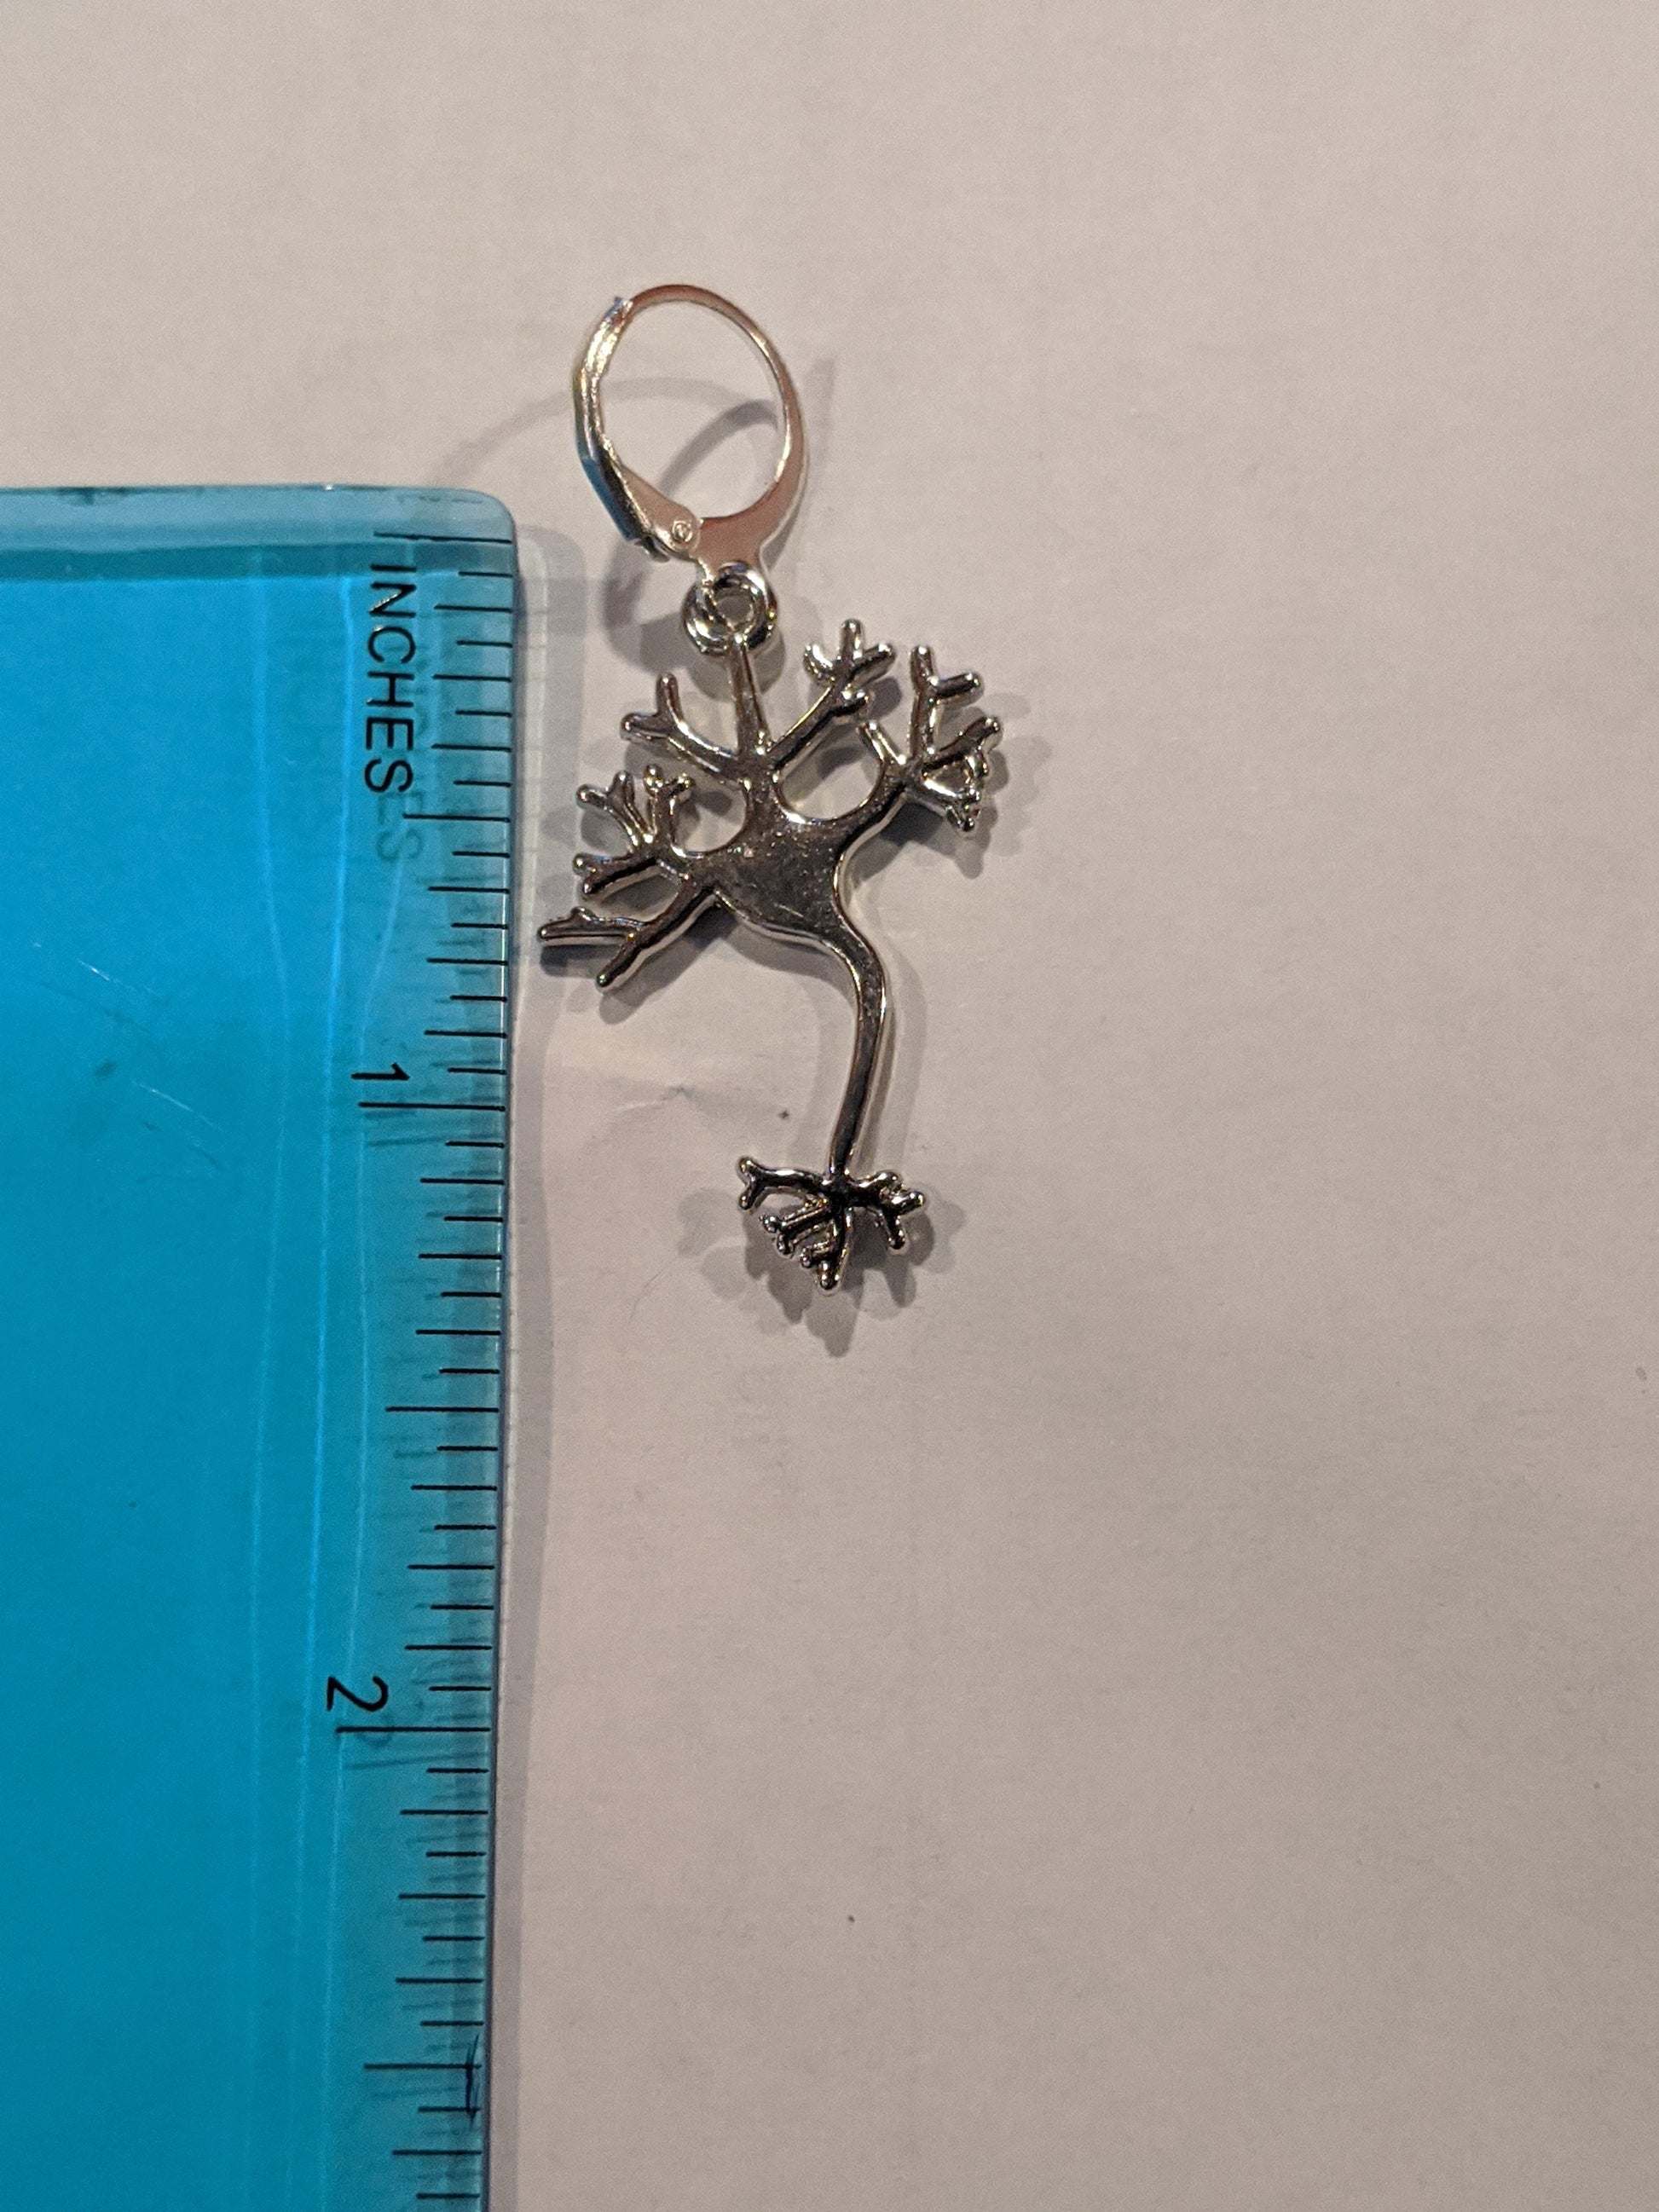 Close up of silver neuron earring next to a blue translucent ruler showing the earring is 1.5 inches long